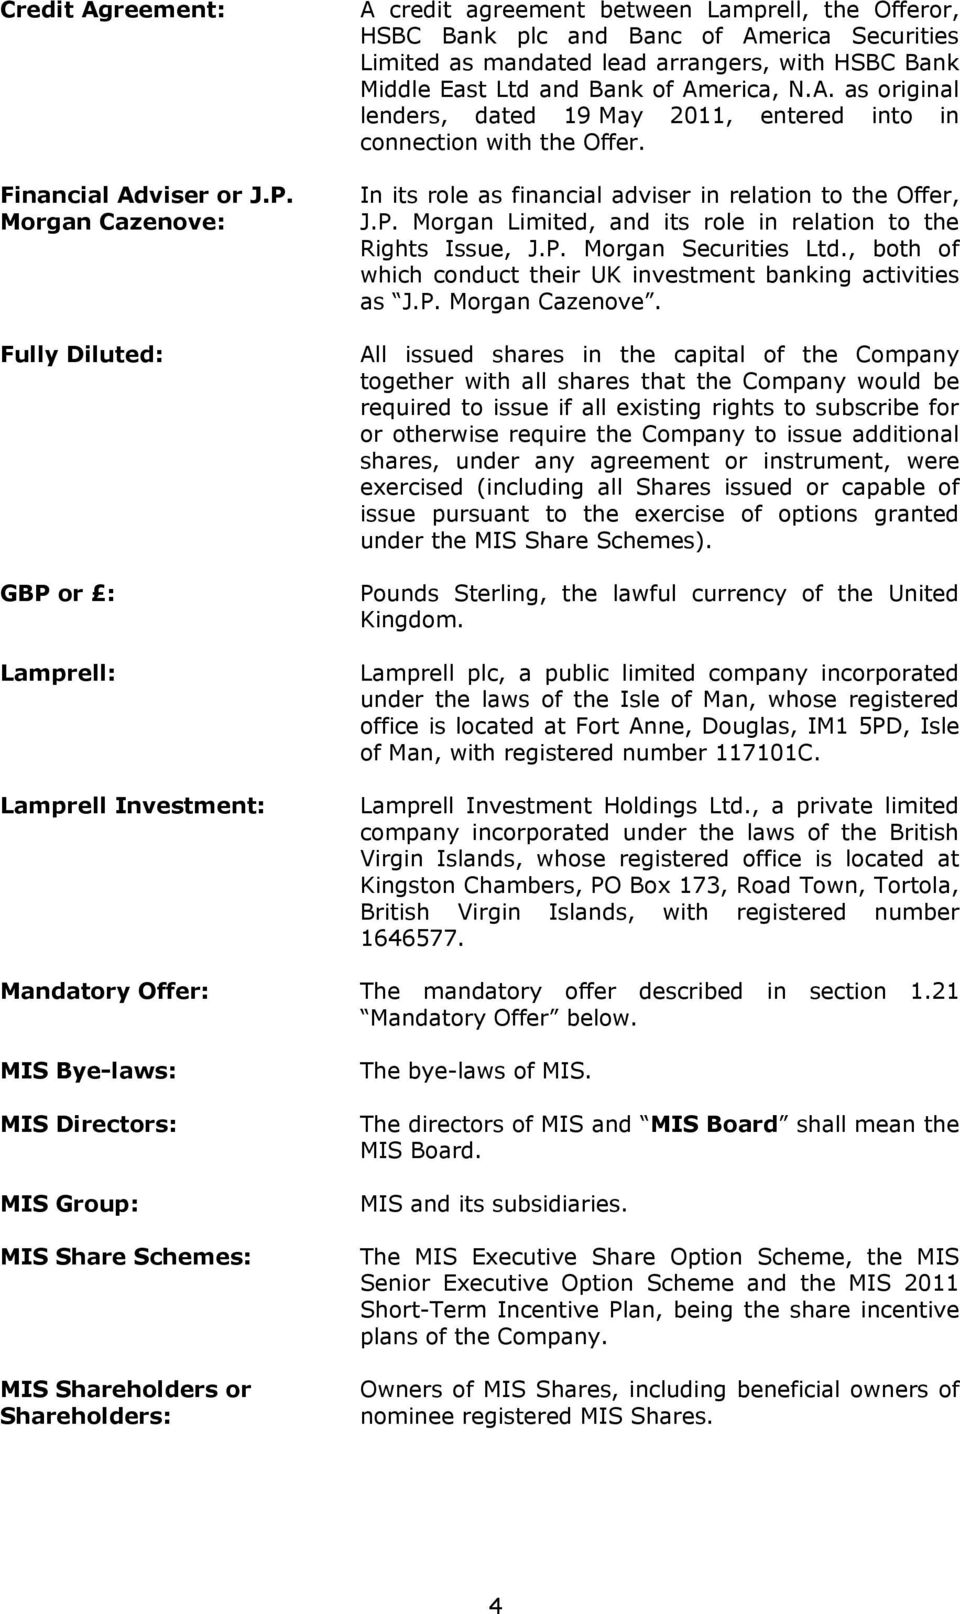 arrangers, with HSBC Bank Middle East Ltd and Bank of America, N.A. as original lenders, dated 19 May 2011, entered into in connection with the Offer.